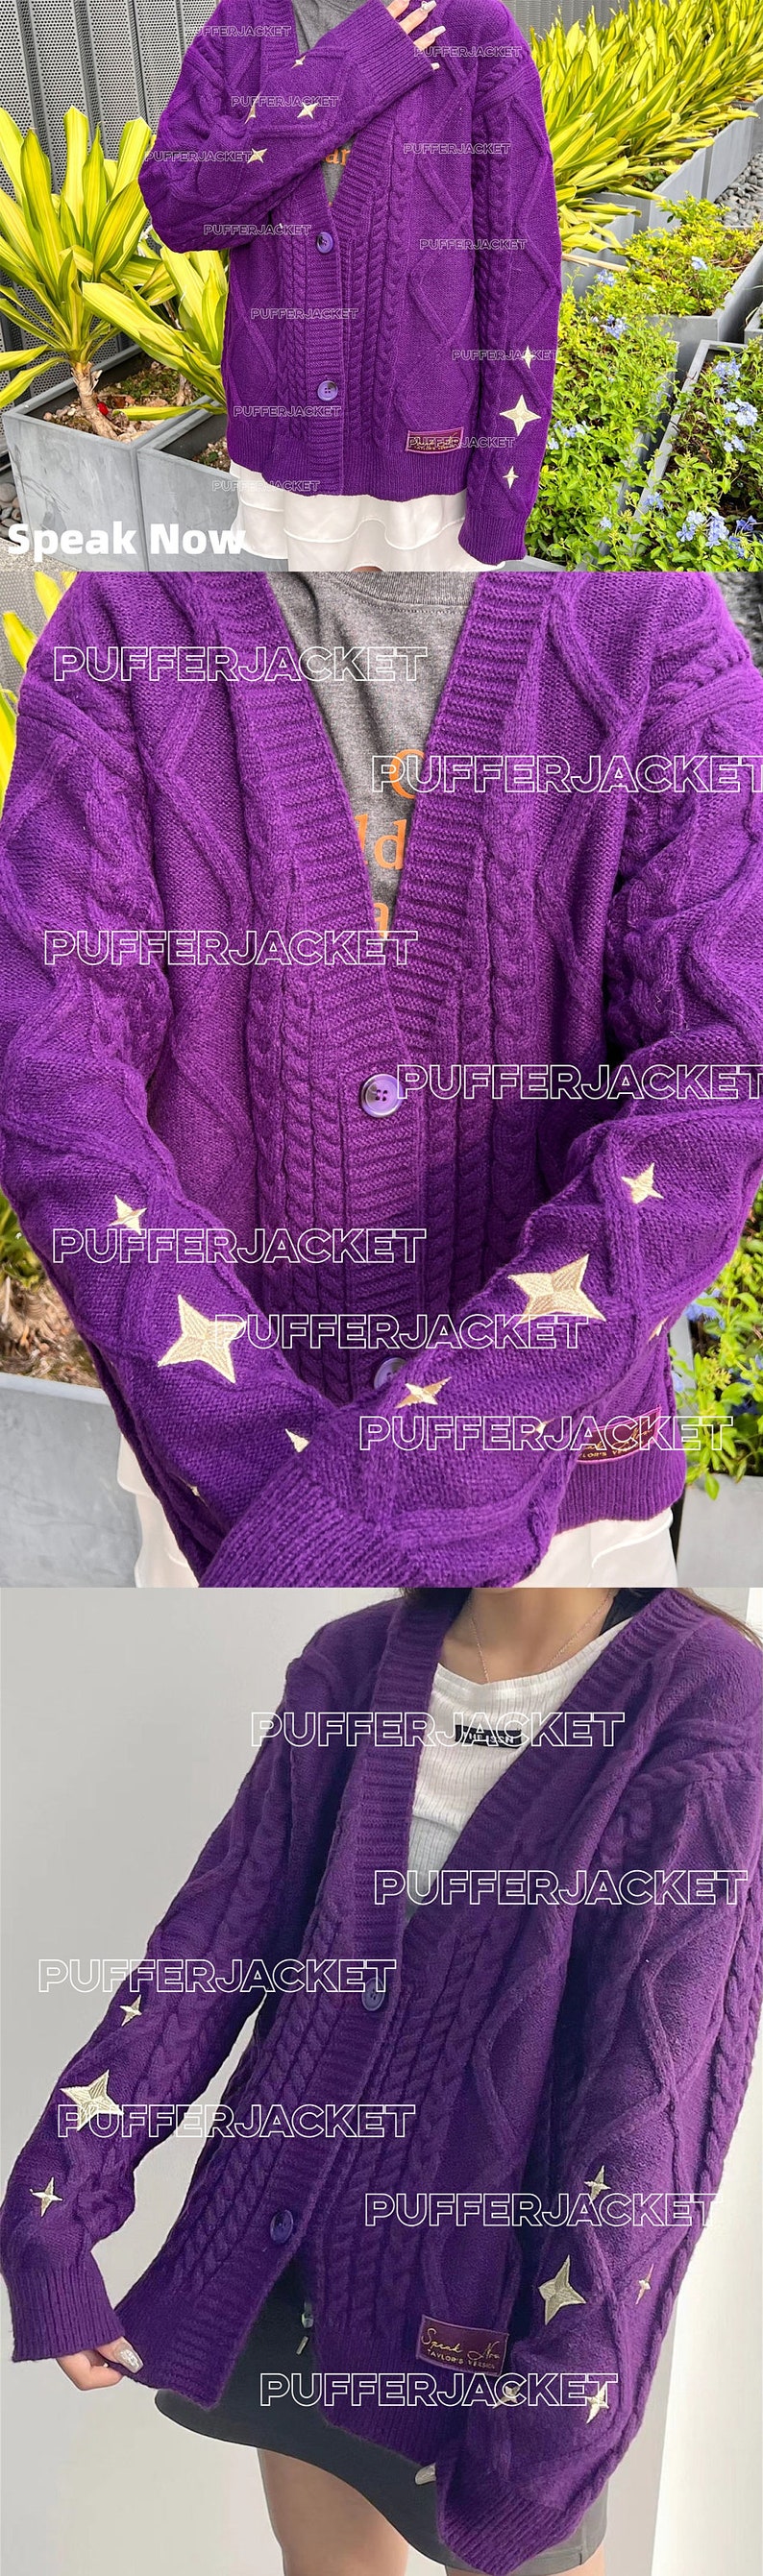 1989 blue folk cardigan/star embroidered cardigan/v-neck oversized cute hand-knitted holiday button sweater/gift for fans image 8